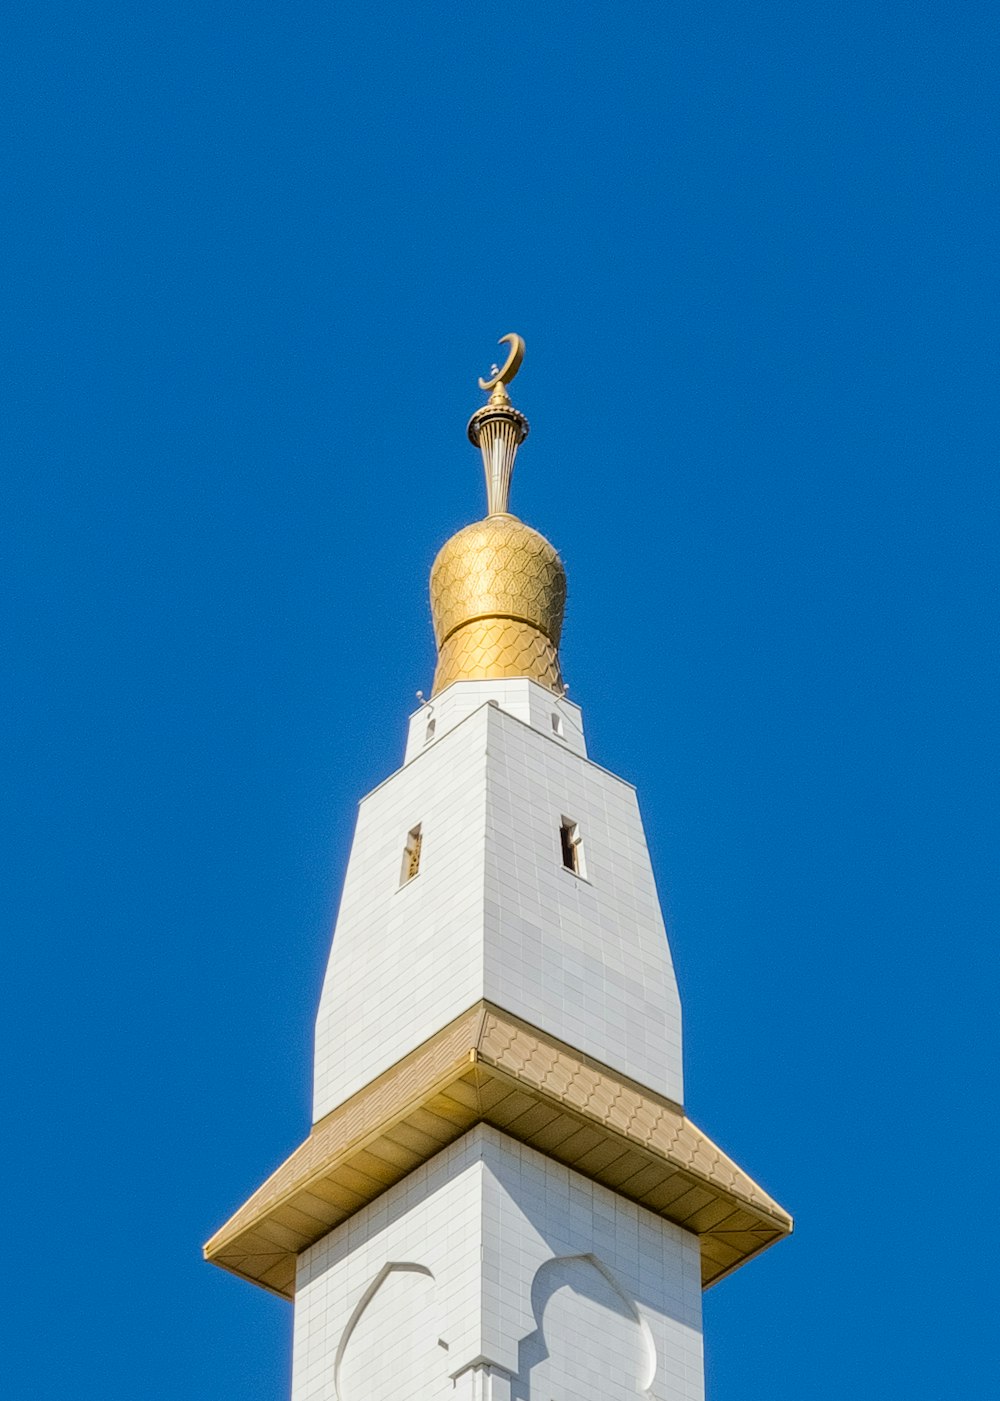 a tall white clock tower with a gold top